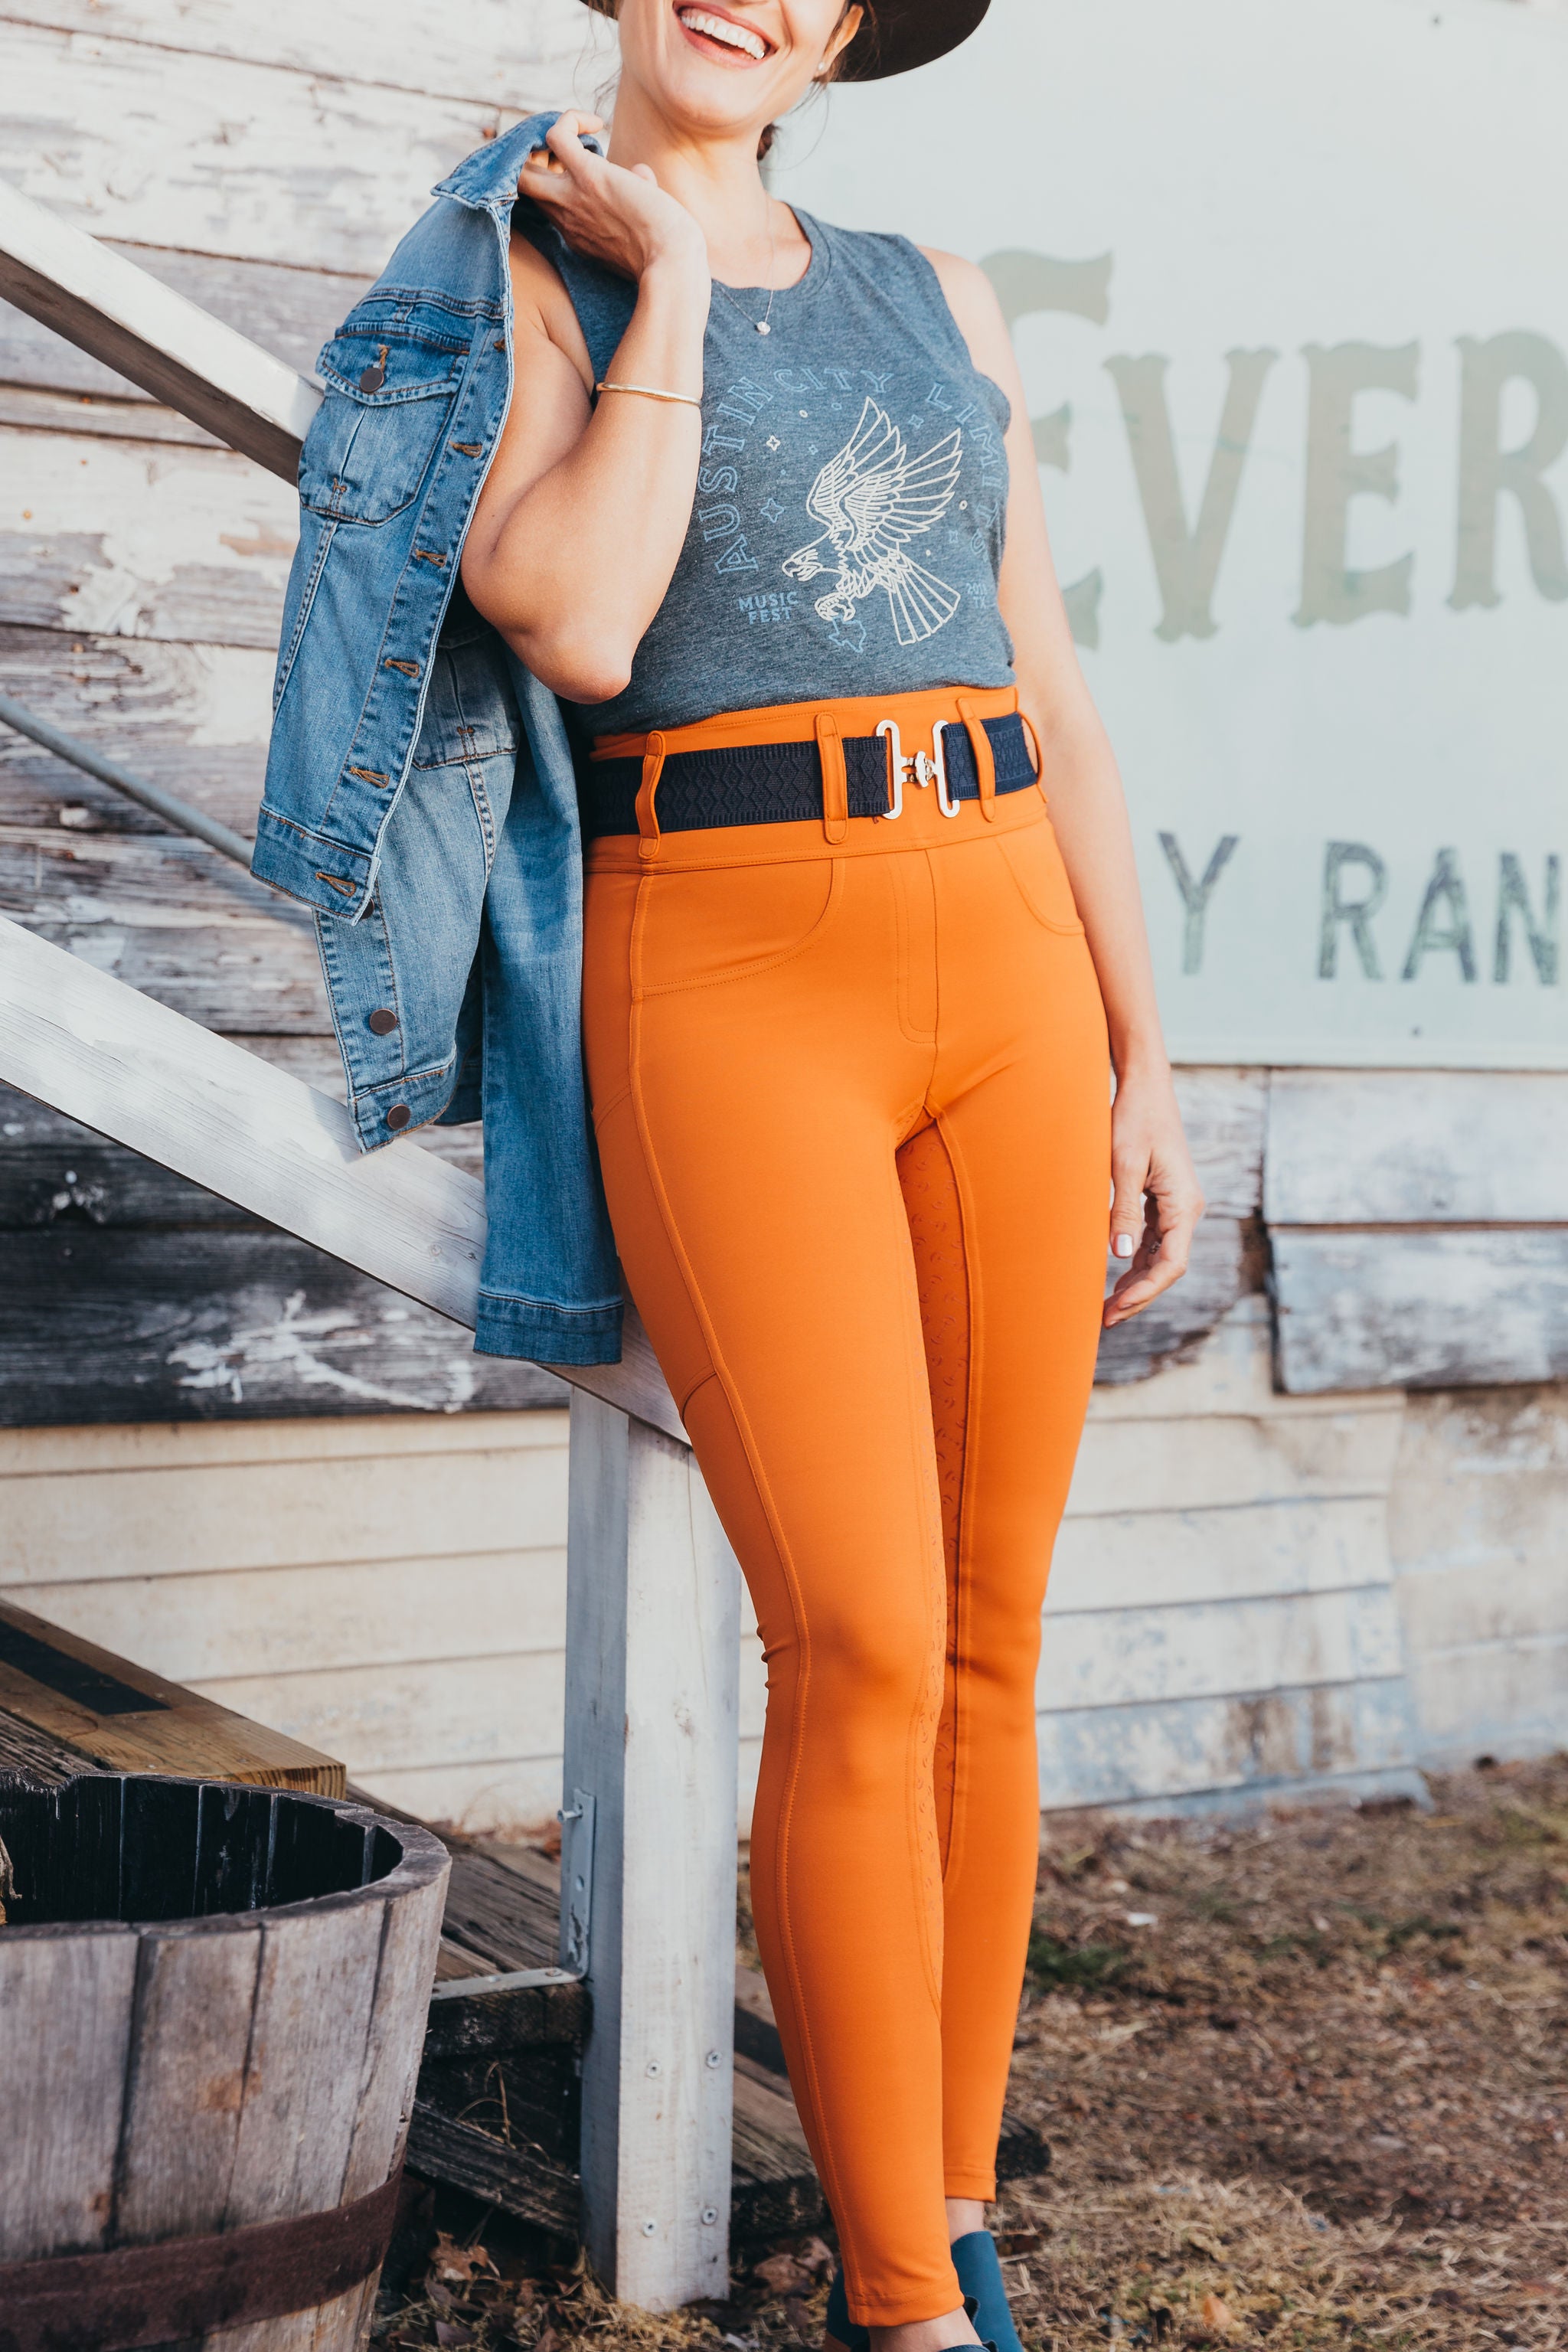 Canter Culture's glazed ginger riding pants look great with a belt and jacket.